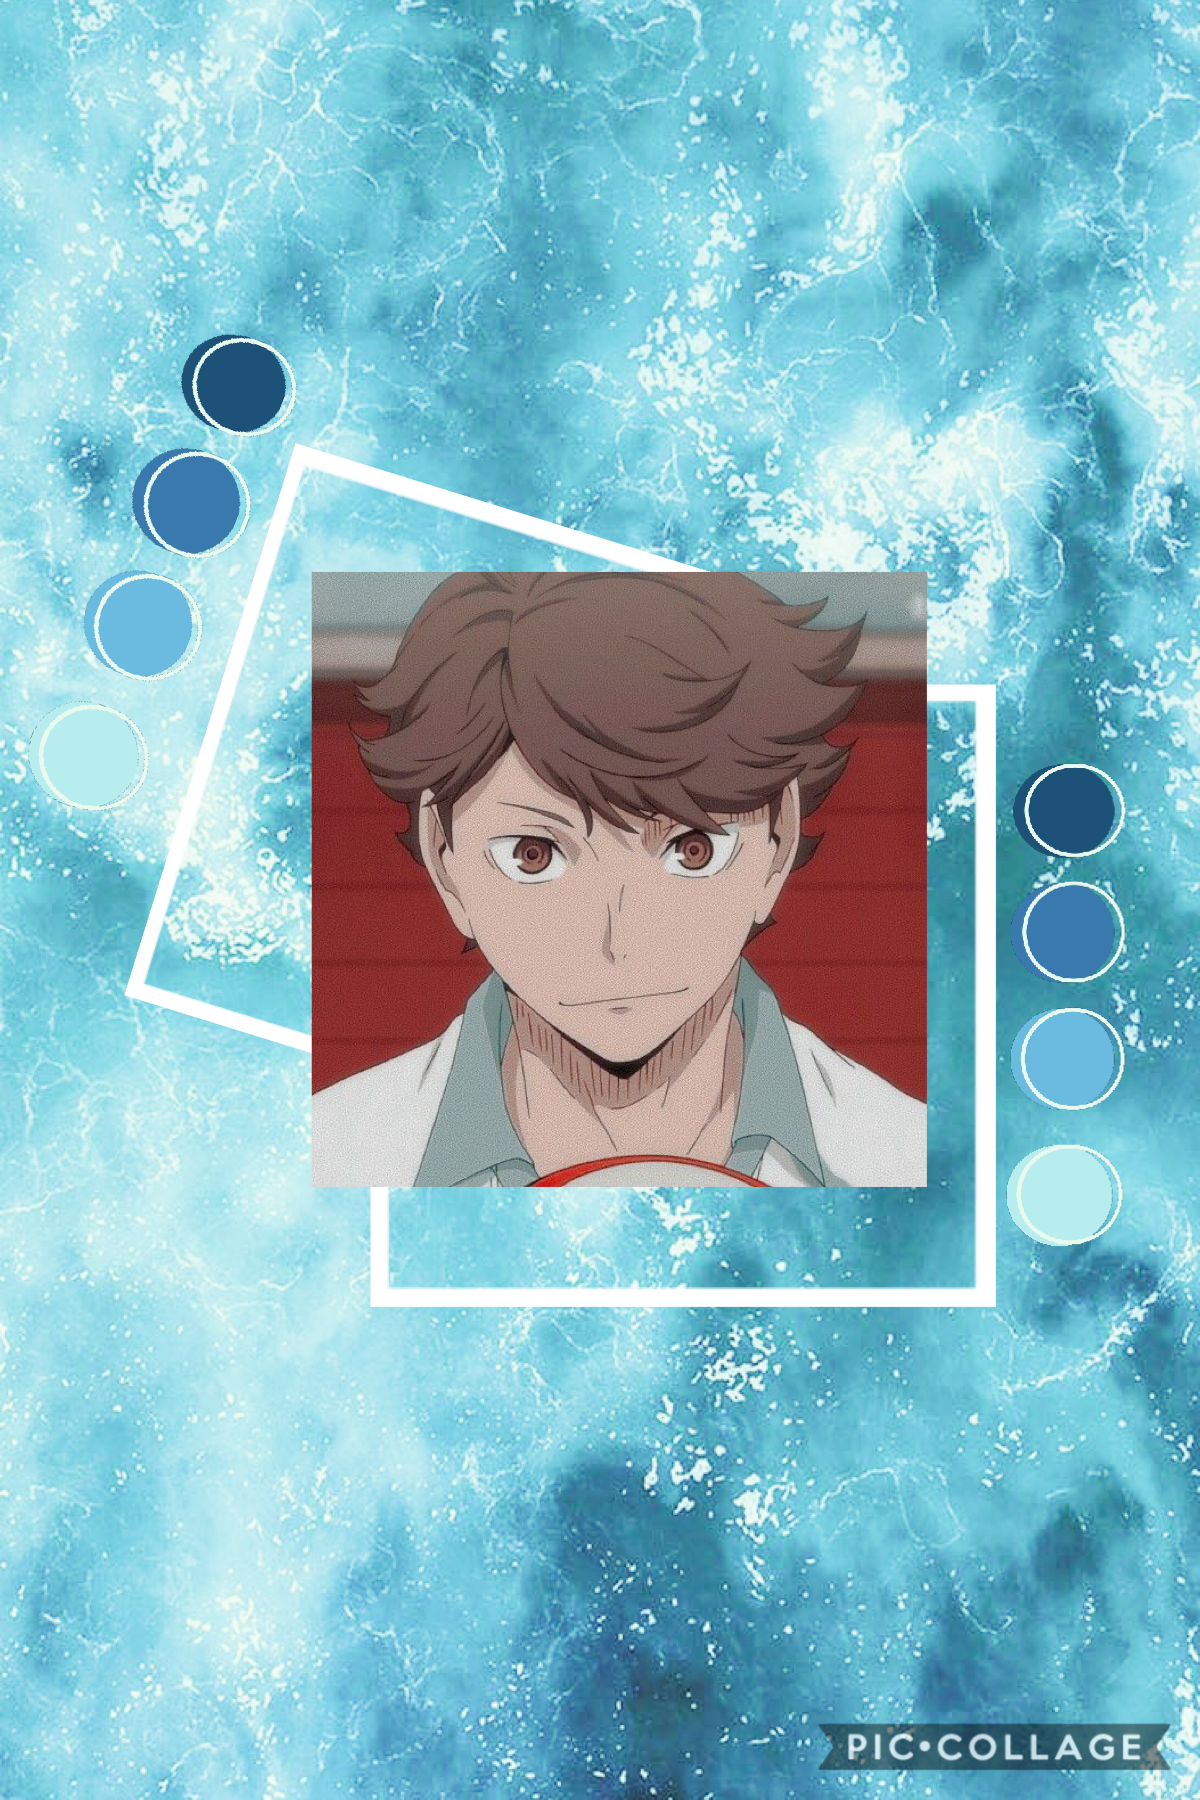 In honor of haikyuu ending and oikawa’s b-day I made him a collage. ( did anyone else cry because the manga is ending? 😭 )